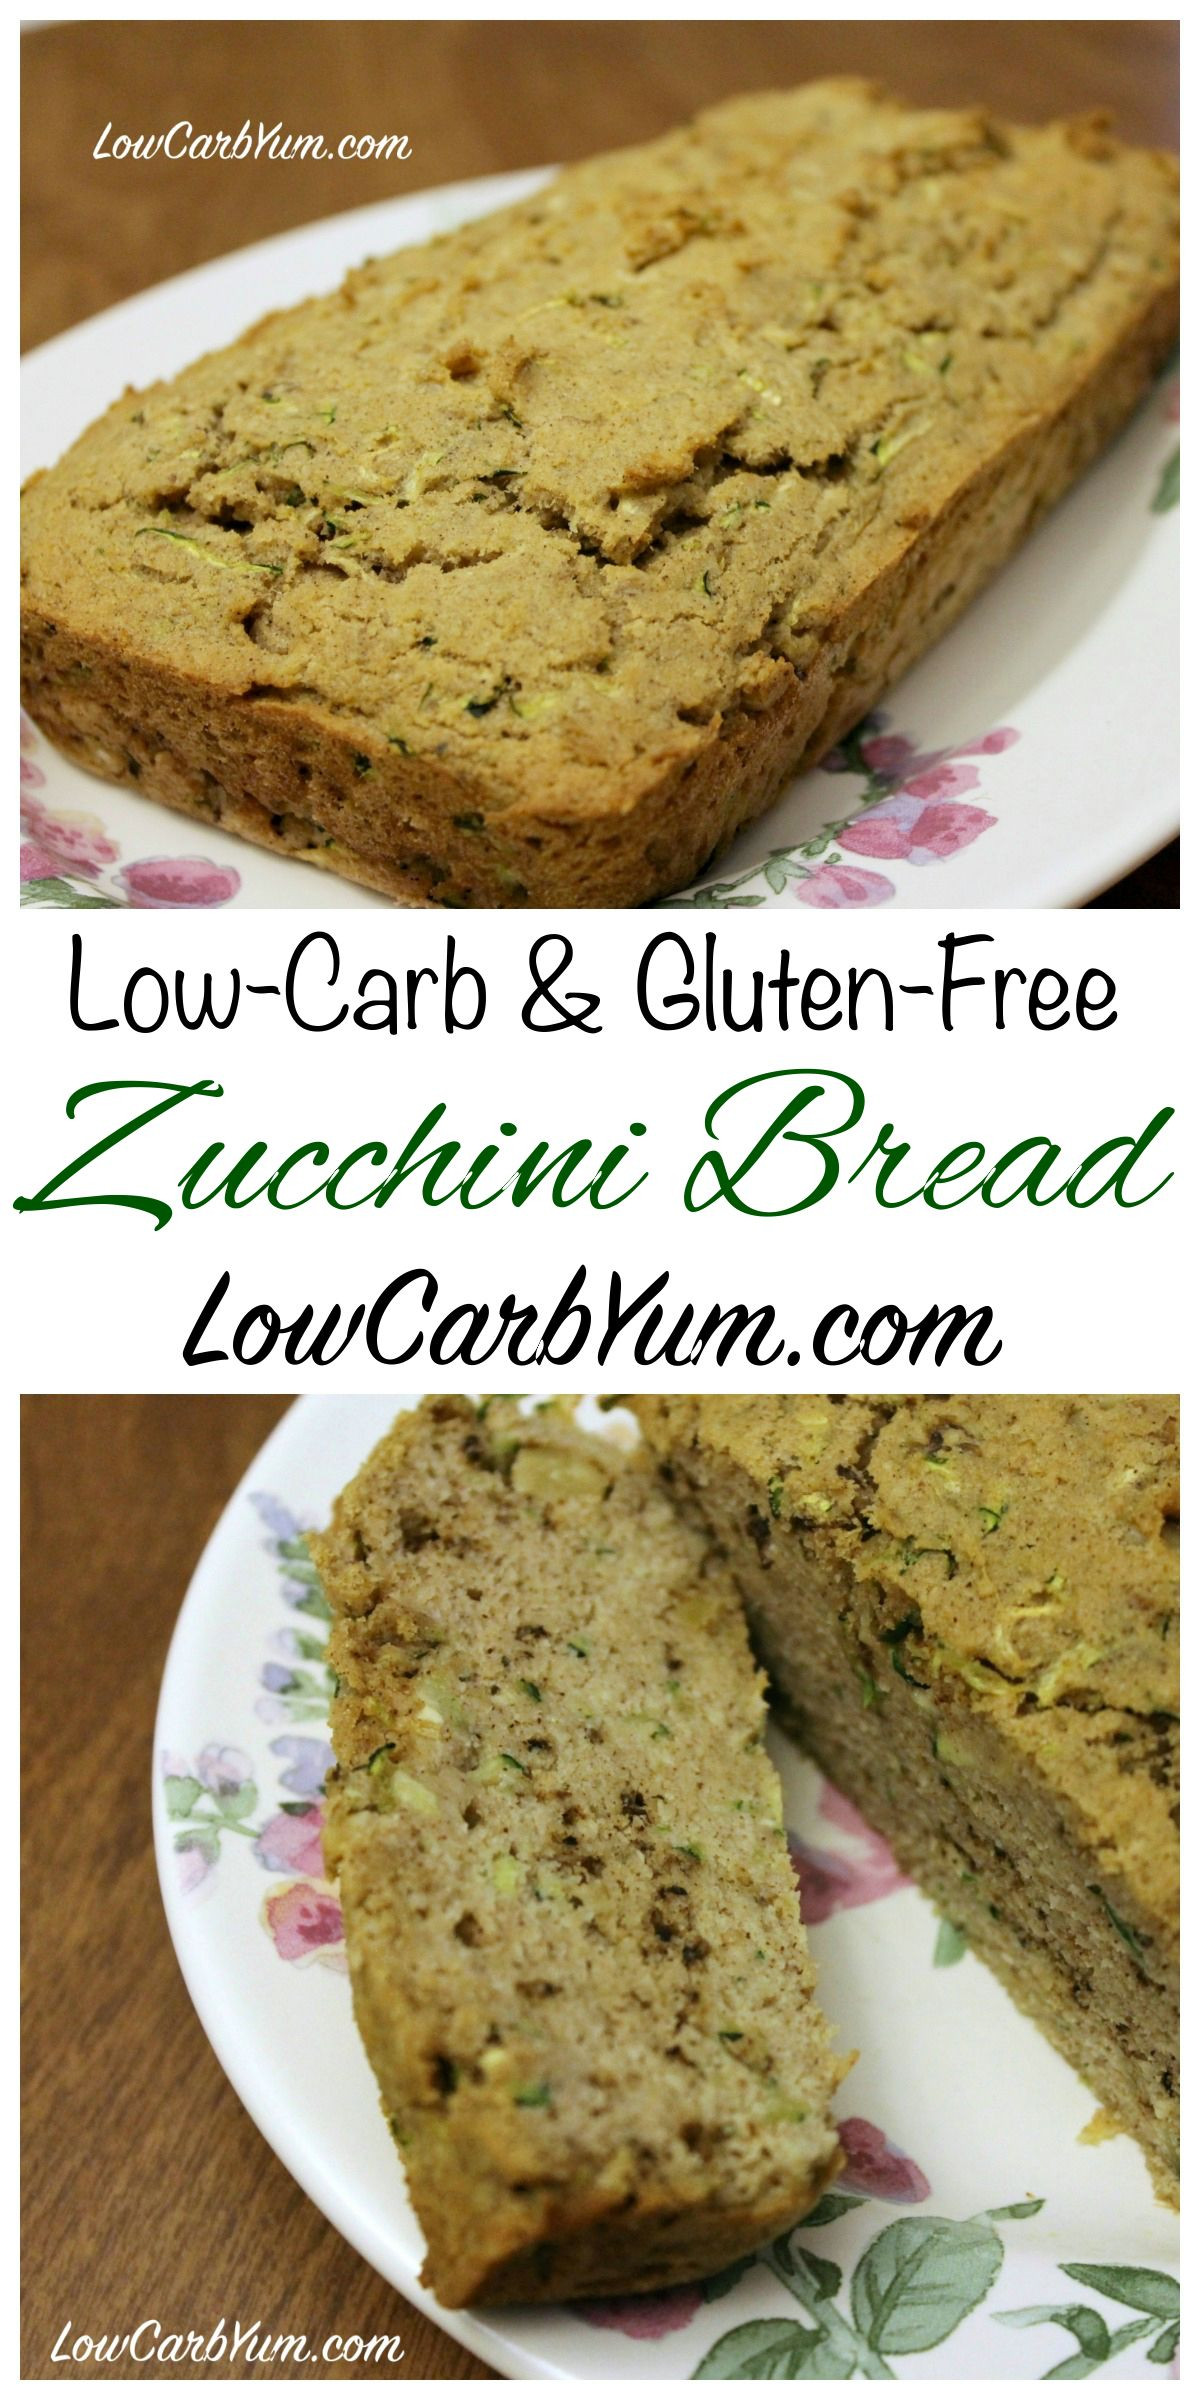 Low Carb Zucchini Bread Recipe
 Are you still looking for the perfect low carb zucchini